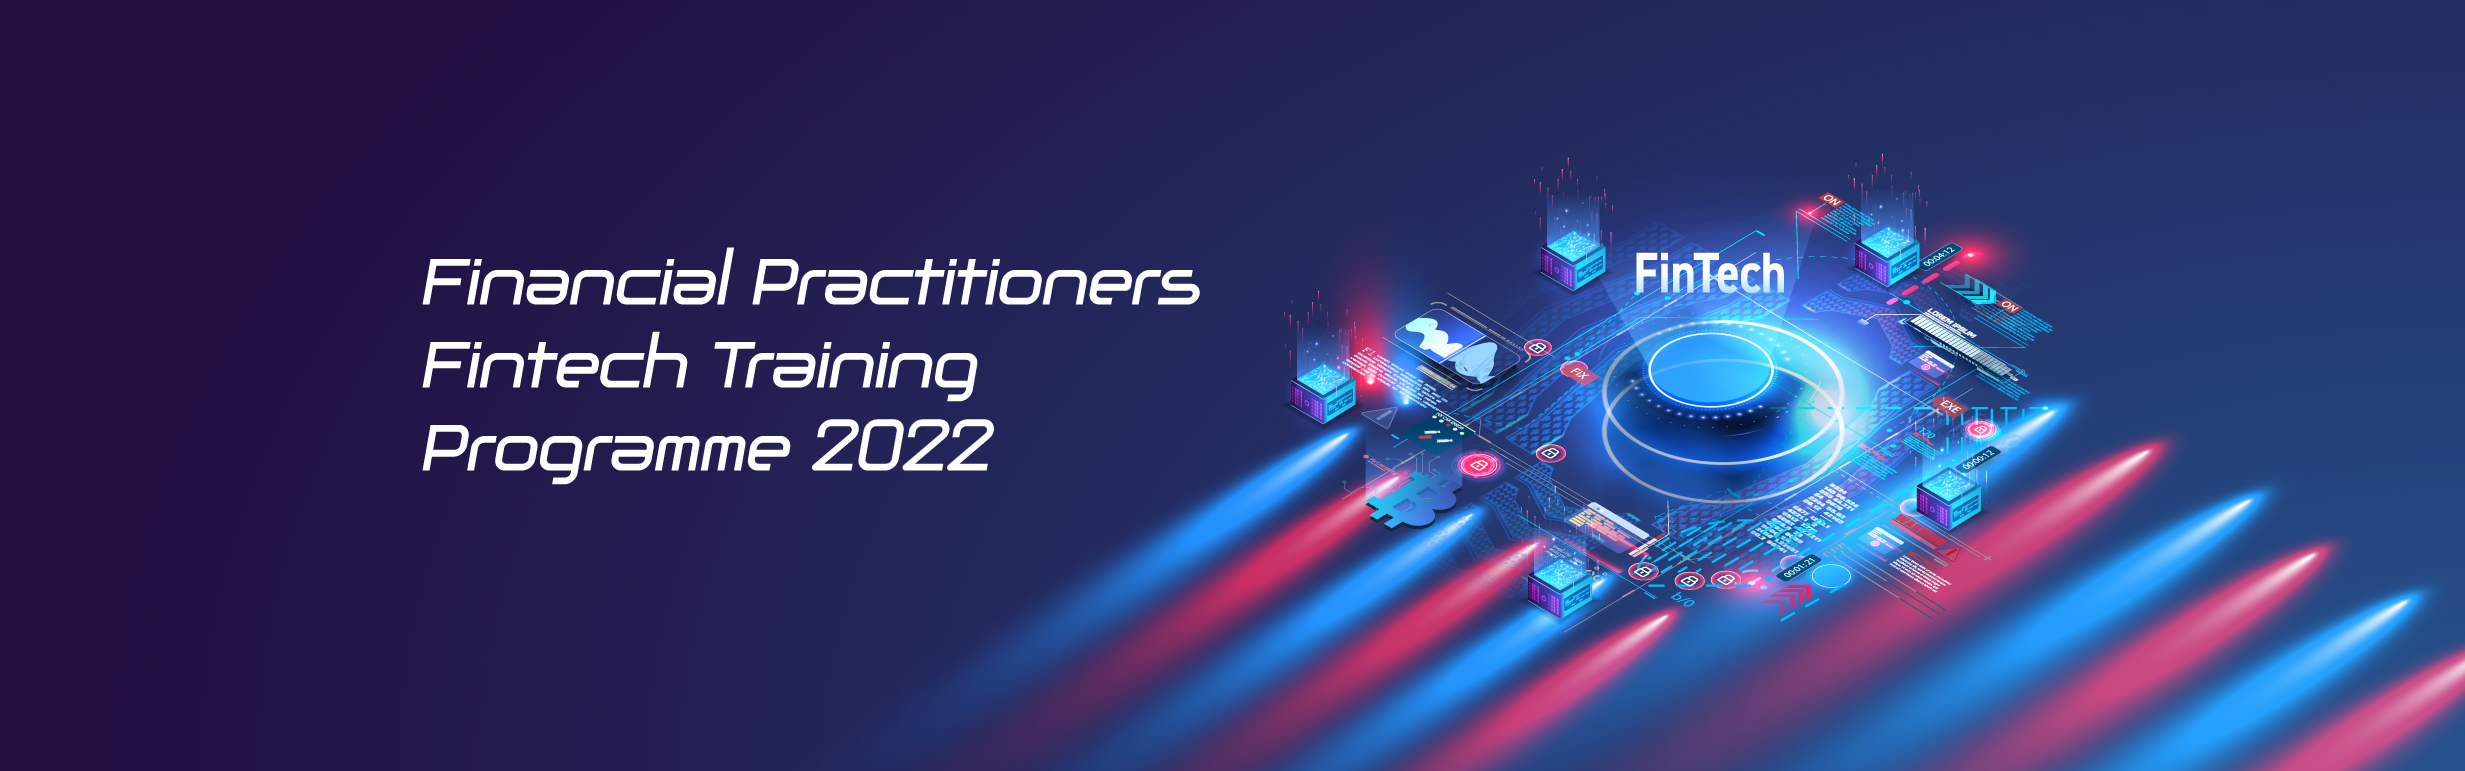 Financial Practitioners Fintech Training Programme 2022